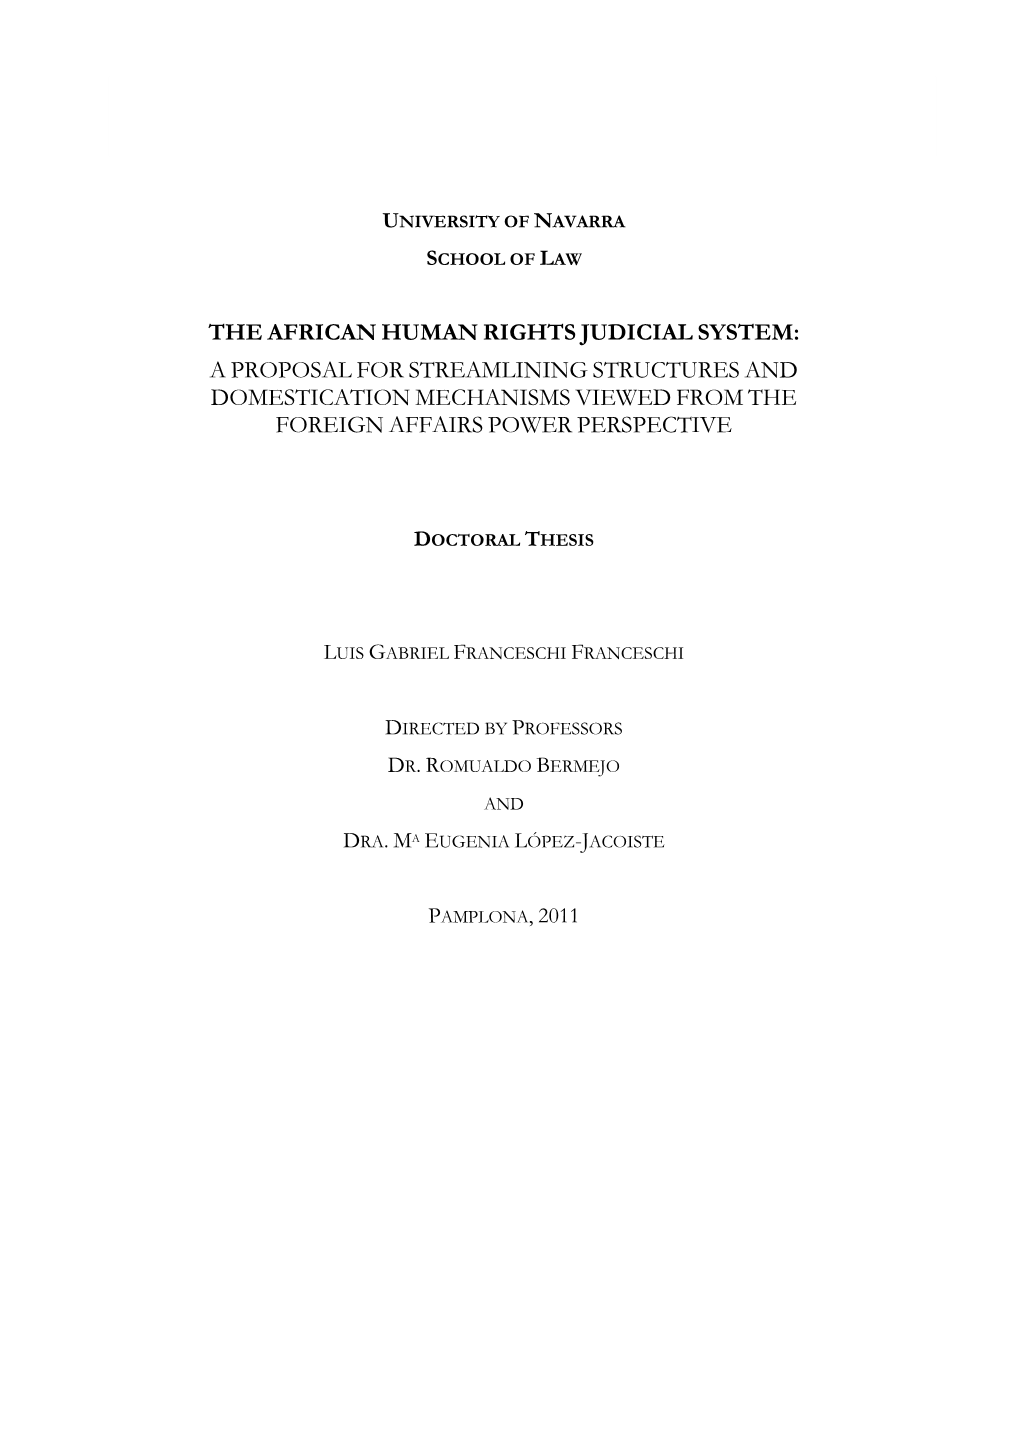 The African Human Rights Judicial System: a Proposal for Streamlining Structures and Domestication Mechanisms Viewed from the Foreign Affairs Power Perspective